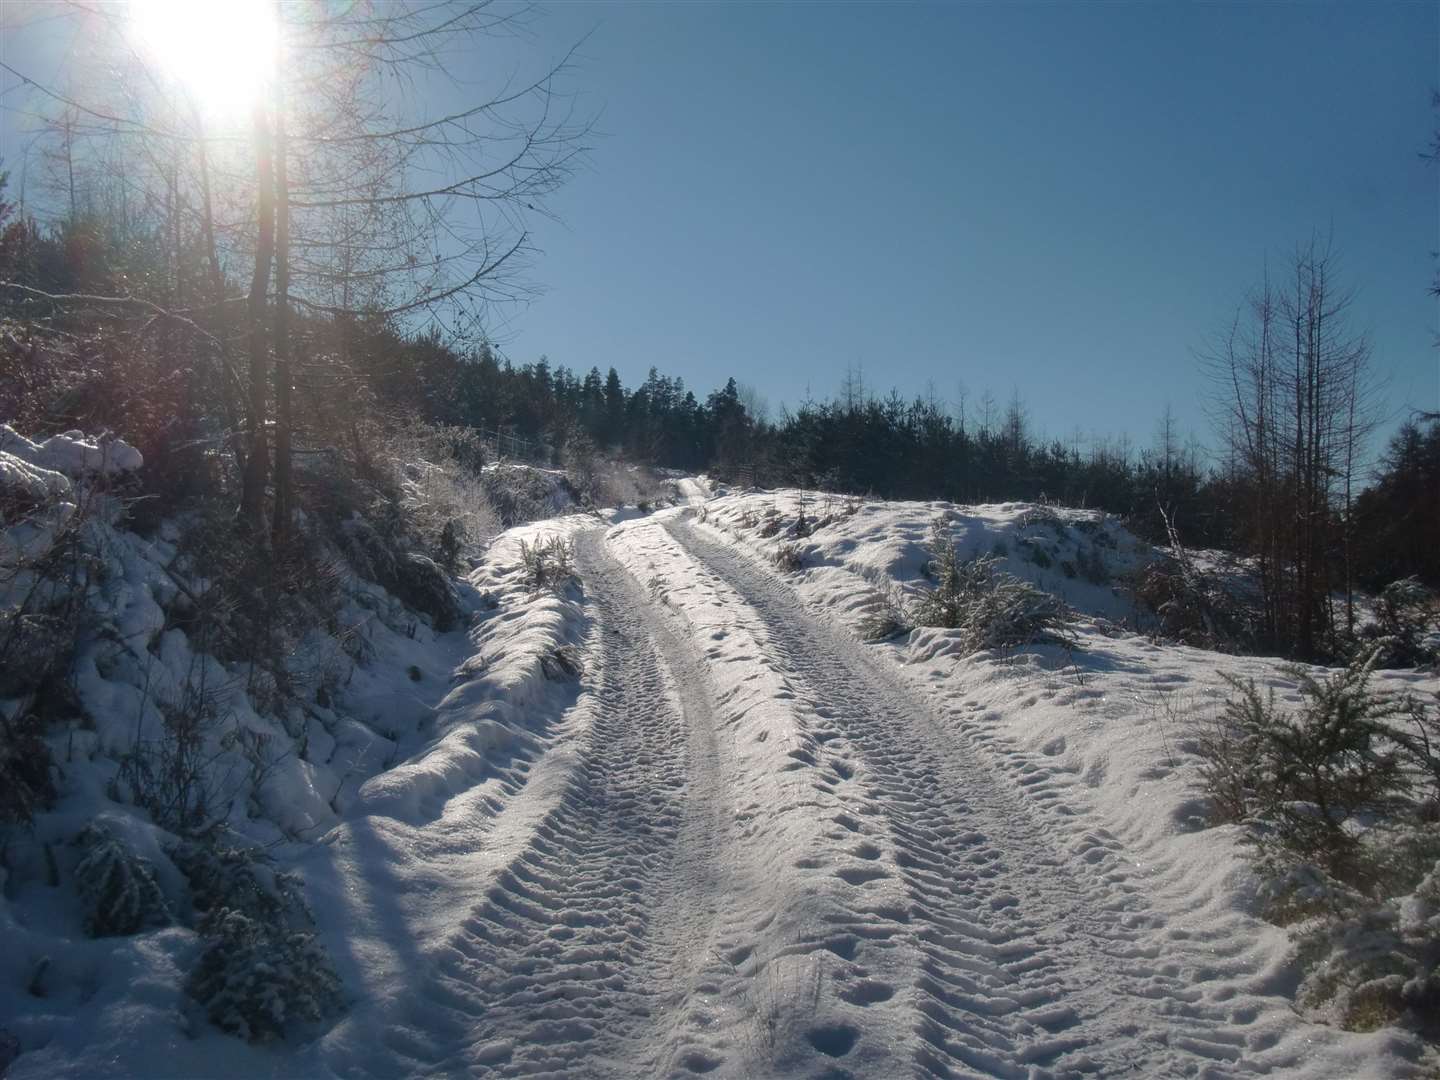 Tractor tracks in the snow made the walking easier.